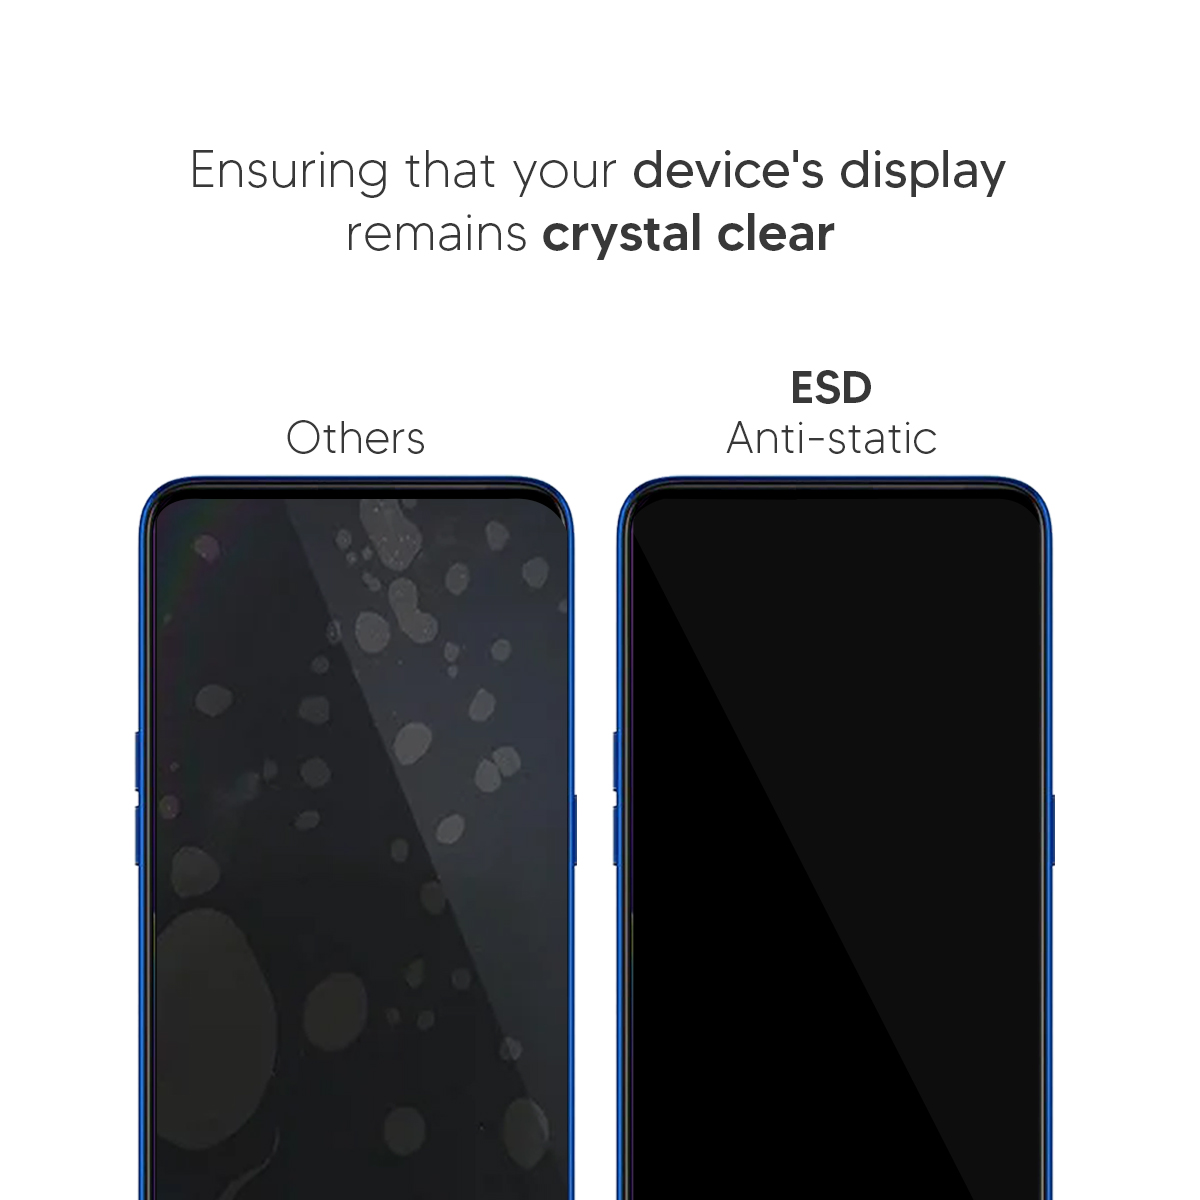 Beyox ESD Anti Static 5D Glass for Realme 6s